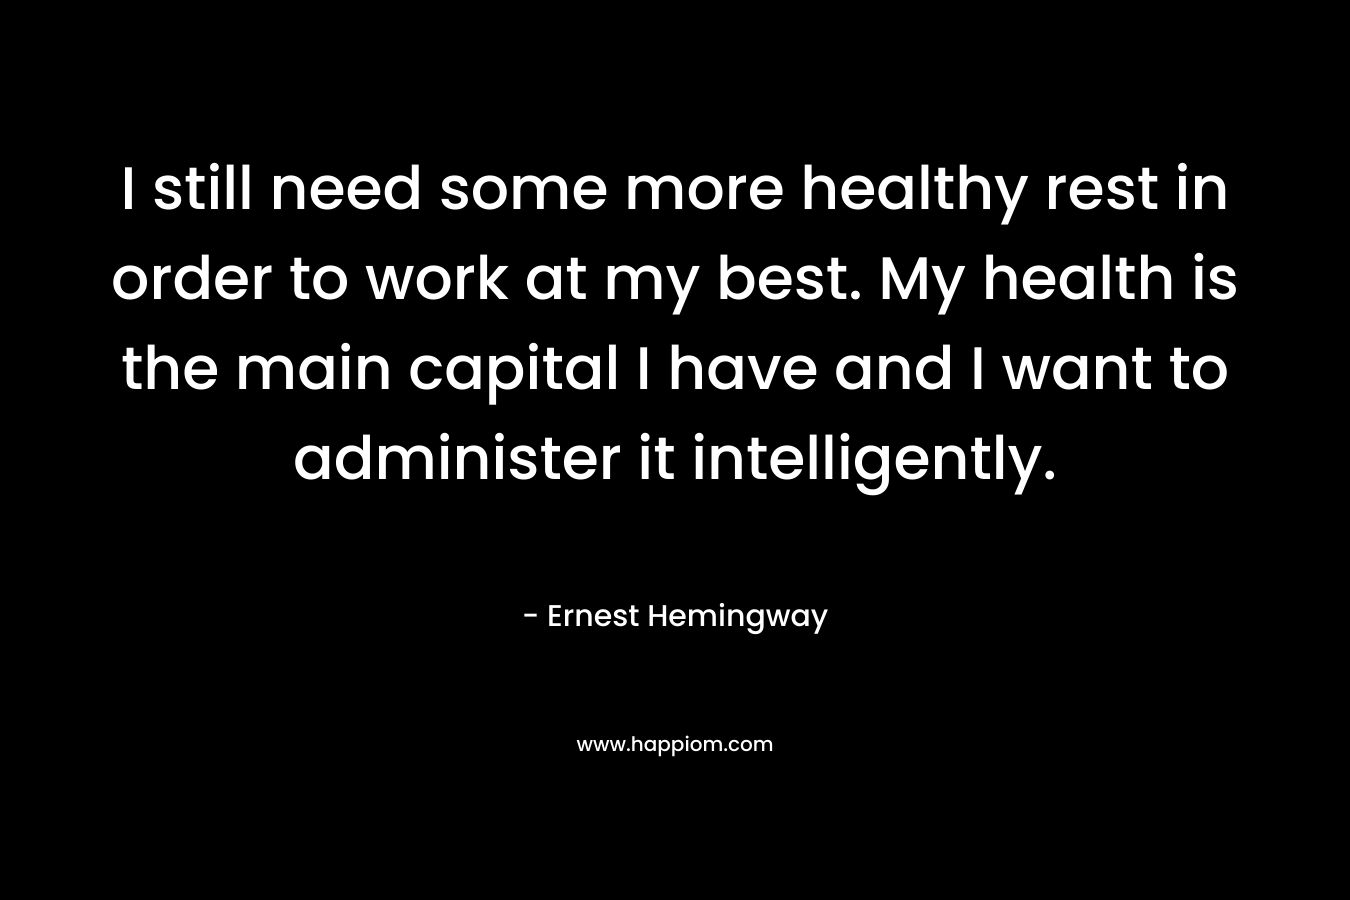 I still need some more healthy rest in order to work at my best. My health is the main capital I have and I want to administer it intelligently. – Ernest Hemingway